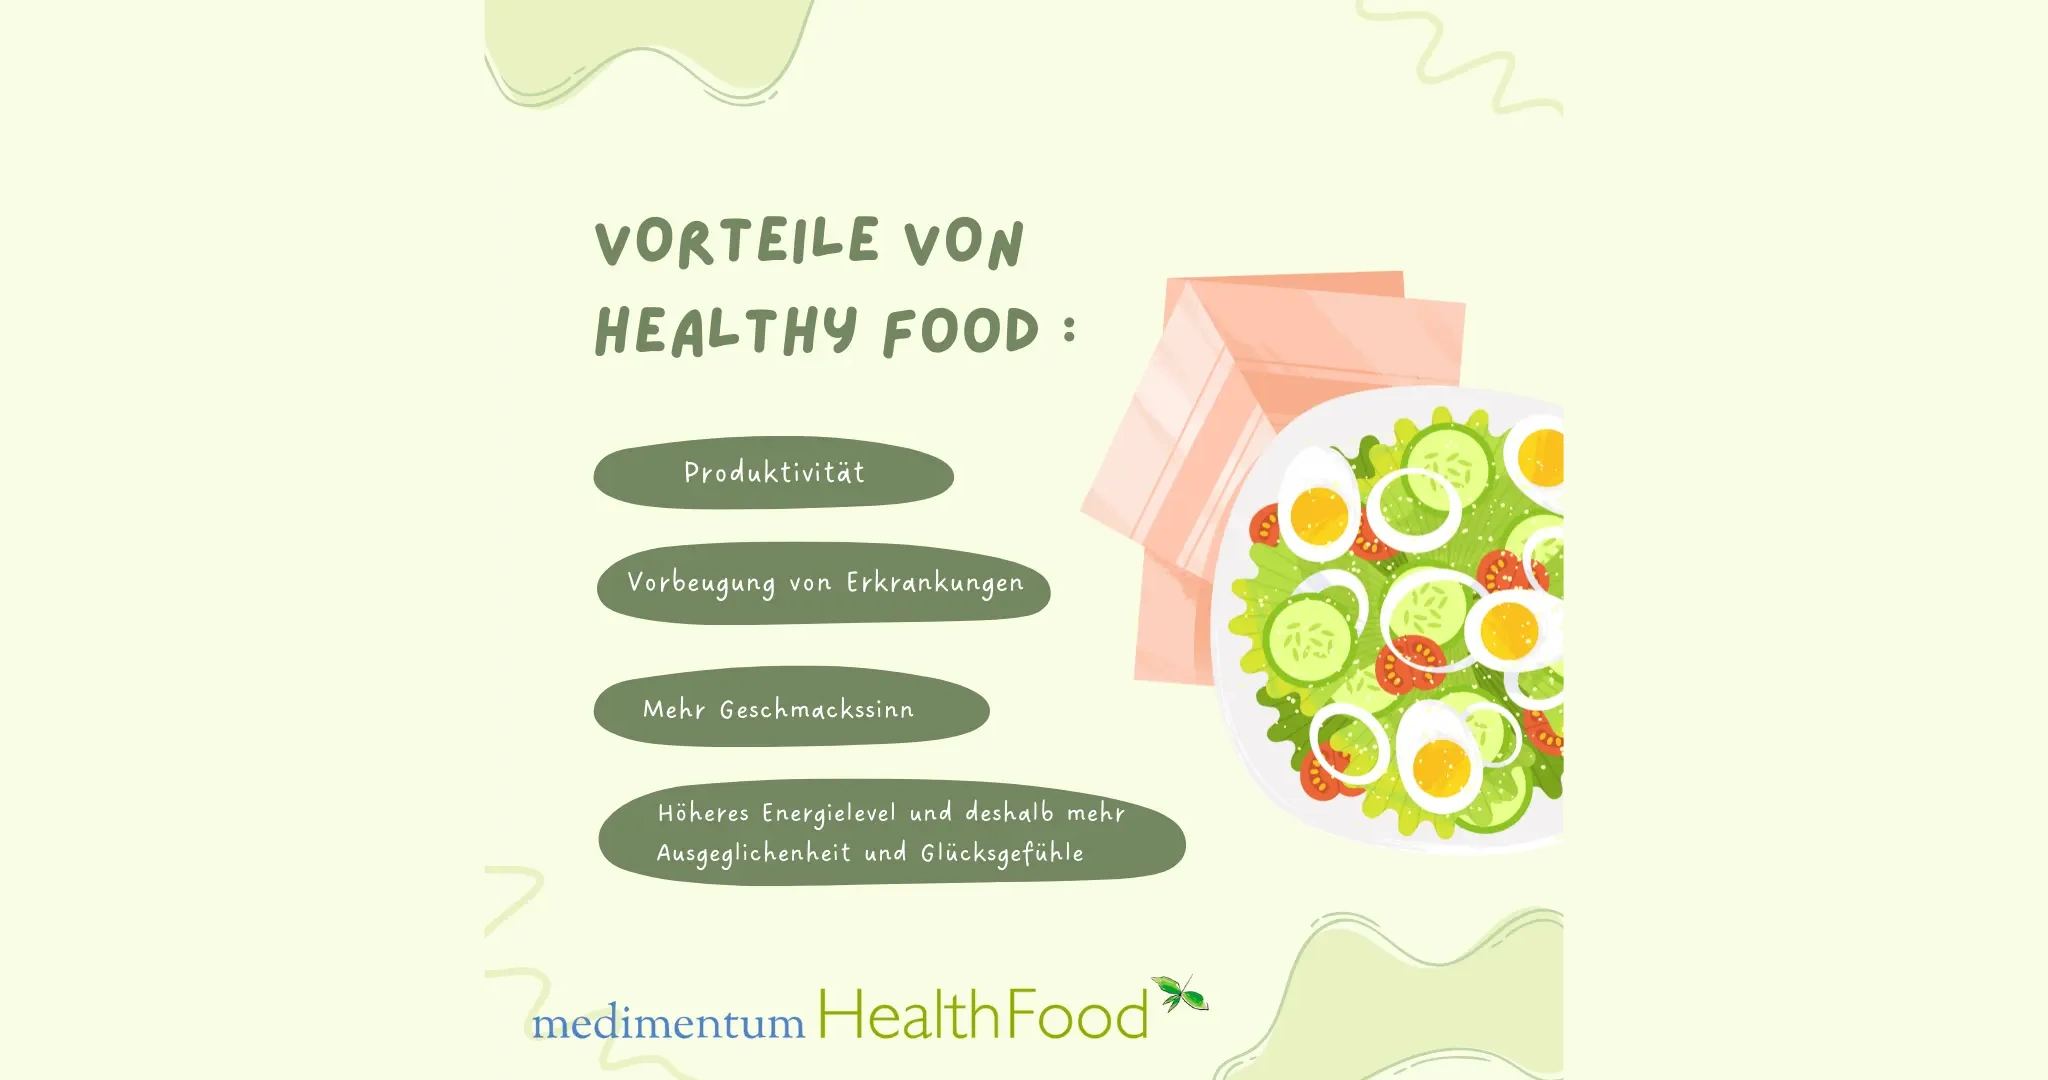 Infographic with text: "Benefits of Healthy Food: Productivity, disease prevention, better taste buds, higher energy levels and therefore more balance and happiness".